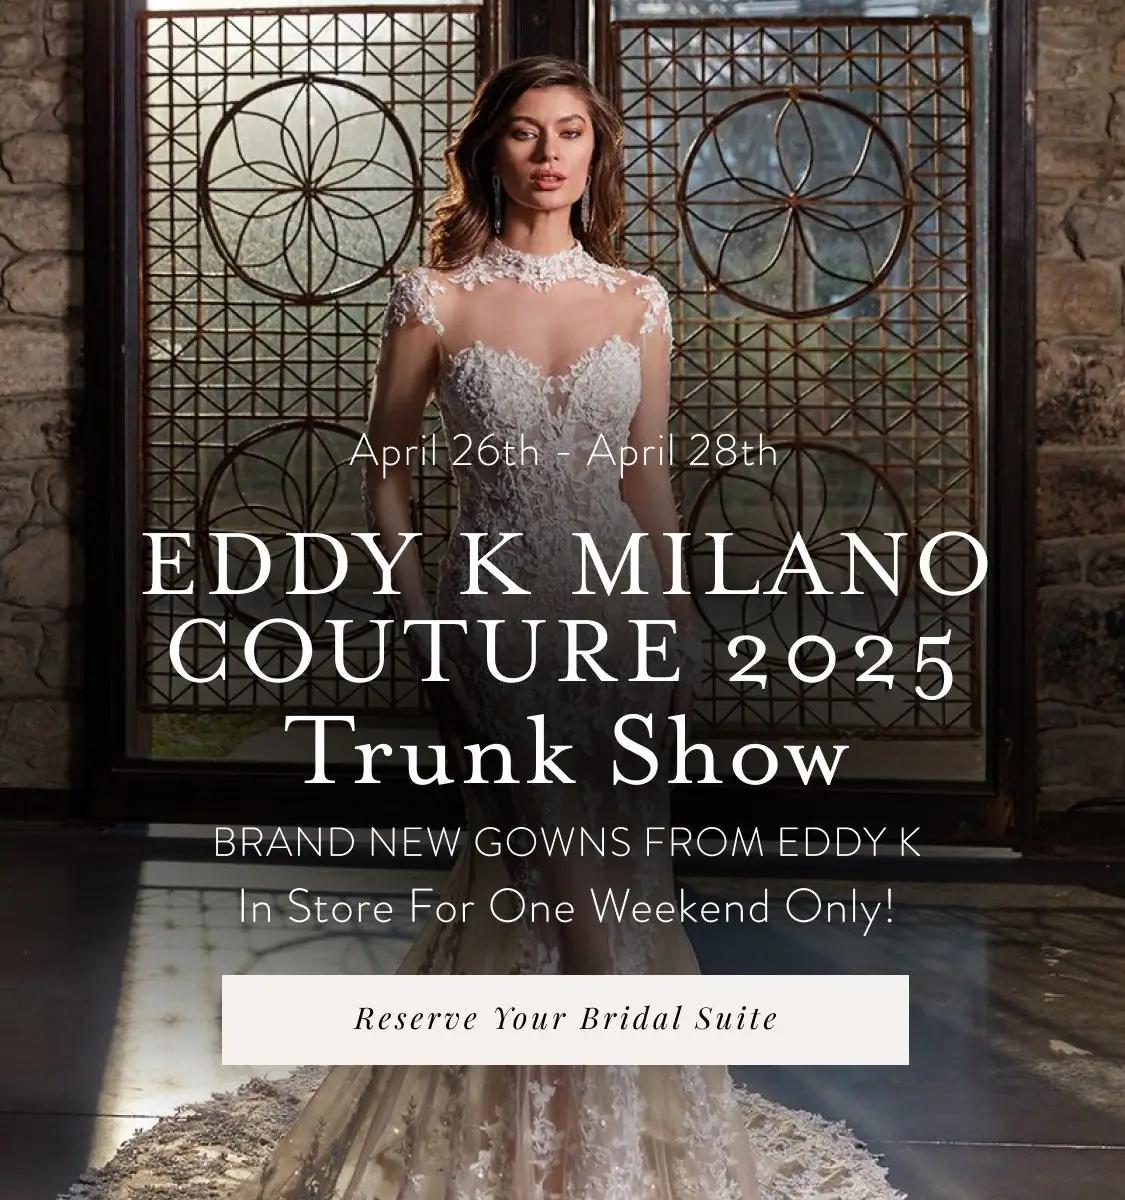 Mobile Eddy K Milano Couture Trunk Show Banner